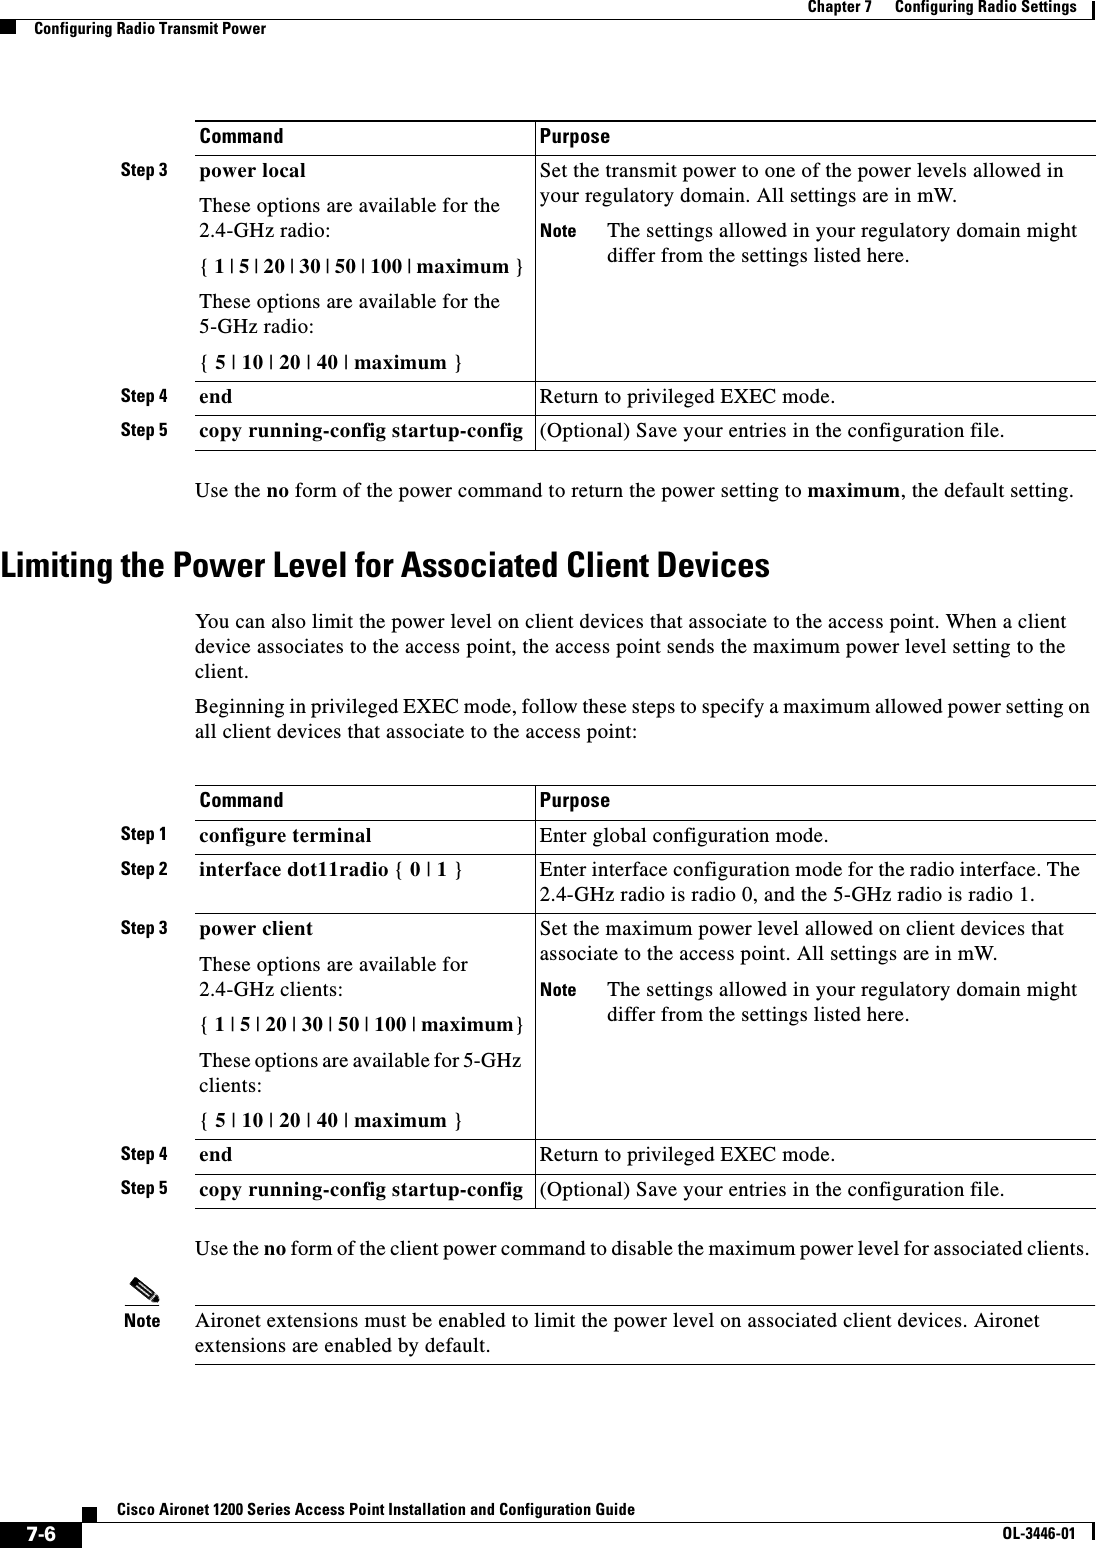 7-6Cisco Aironet 1200 Series Access Point Installation and Configuration GuideOL-3446-01Chapter 7      Configuring Radio SettingsConfiguring Radio Transmit PowerUse the no form of the power command to return the power setting to maximum, the default setting. Limiting the Power Level for Associated Client DevicesYou can also limit the power level on client devices that associate to the access point. When a client device associates to the access point, the access point sends the maximum power level setting to the client.Beginning in privileged EXEC mode, follow these steps to specify a maximum allowed power setting on all client devices that associate to the access point:Use the no form of the client power command to disable the maximum power level for associated clients. Note Aironet extensions must be enabled to limit the power level on associated client devices. Aironet extensions are enabled by default.Step 3 power local These options are available for the 2.4-GHz radio:{1 | 5 | 20 | 30 | 50 | 100 | maximum }These options are available for the 5-GHz radio:{5 | 10 | 20 | 40 | maximum }Set the transmit power to one of the power levels allowed in your regulatory domain. All settings are in mW.Note The settings allowed in your regulatory domain might differ from the settings listed here.Step 4 end Return to privileged EXEC mode.Step 5 copy running-config startup-config (Optional) Save your entries in the configuration file.Command PurposeCommand PurposeStep 1 configure terminal Enter global configuration mode.Step 2 interface dot11radio { 0 | 1 } Enter interface configuration mode for the radio interface. The 2.4-GHz radio is radio 0, and the 5-GHz radio is radio 1.Step 3 power clientThese options are available for 2.4-GHz clients:{1 | 5 | 20 | 30 | 50 | 100 | maximum}These options are available for 5-GHz clients:{5 | 10 | 20 | 40 | maximum }Set the maximum power level allowed on client devices that associate to the access point. All settings are in mW.Note The settings allowed in your regulatory domain might differ from the settings listed here.Step 4 end Return to privileged EXEC mode.Step 5 copy running-config startup-config (Optional) Save your entries in the configuration file.